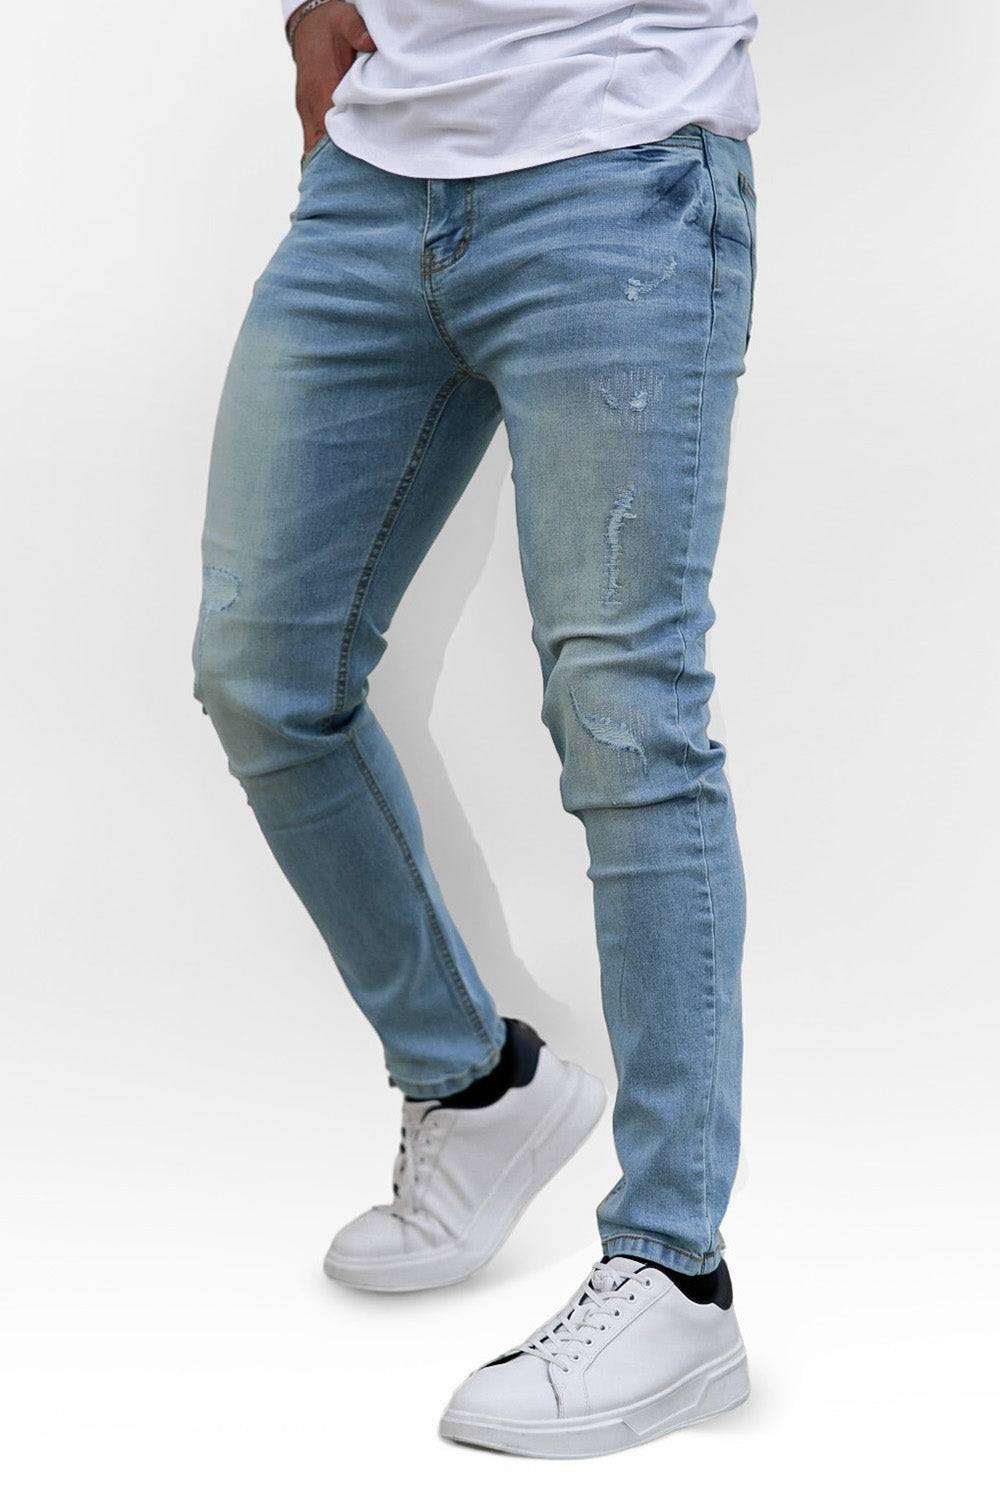 Gingtto Big And Tall Slim Fit Jeans